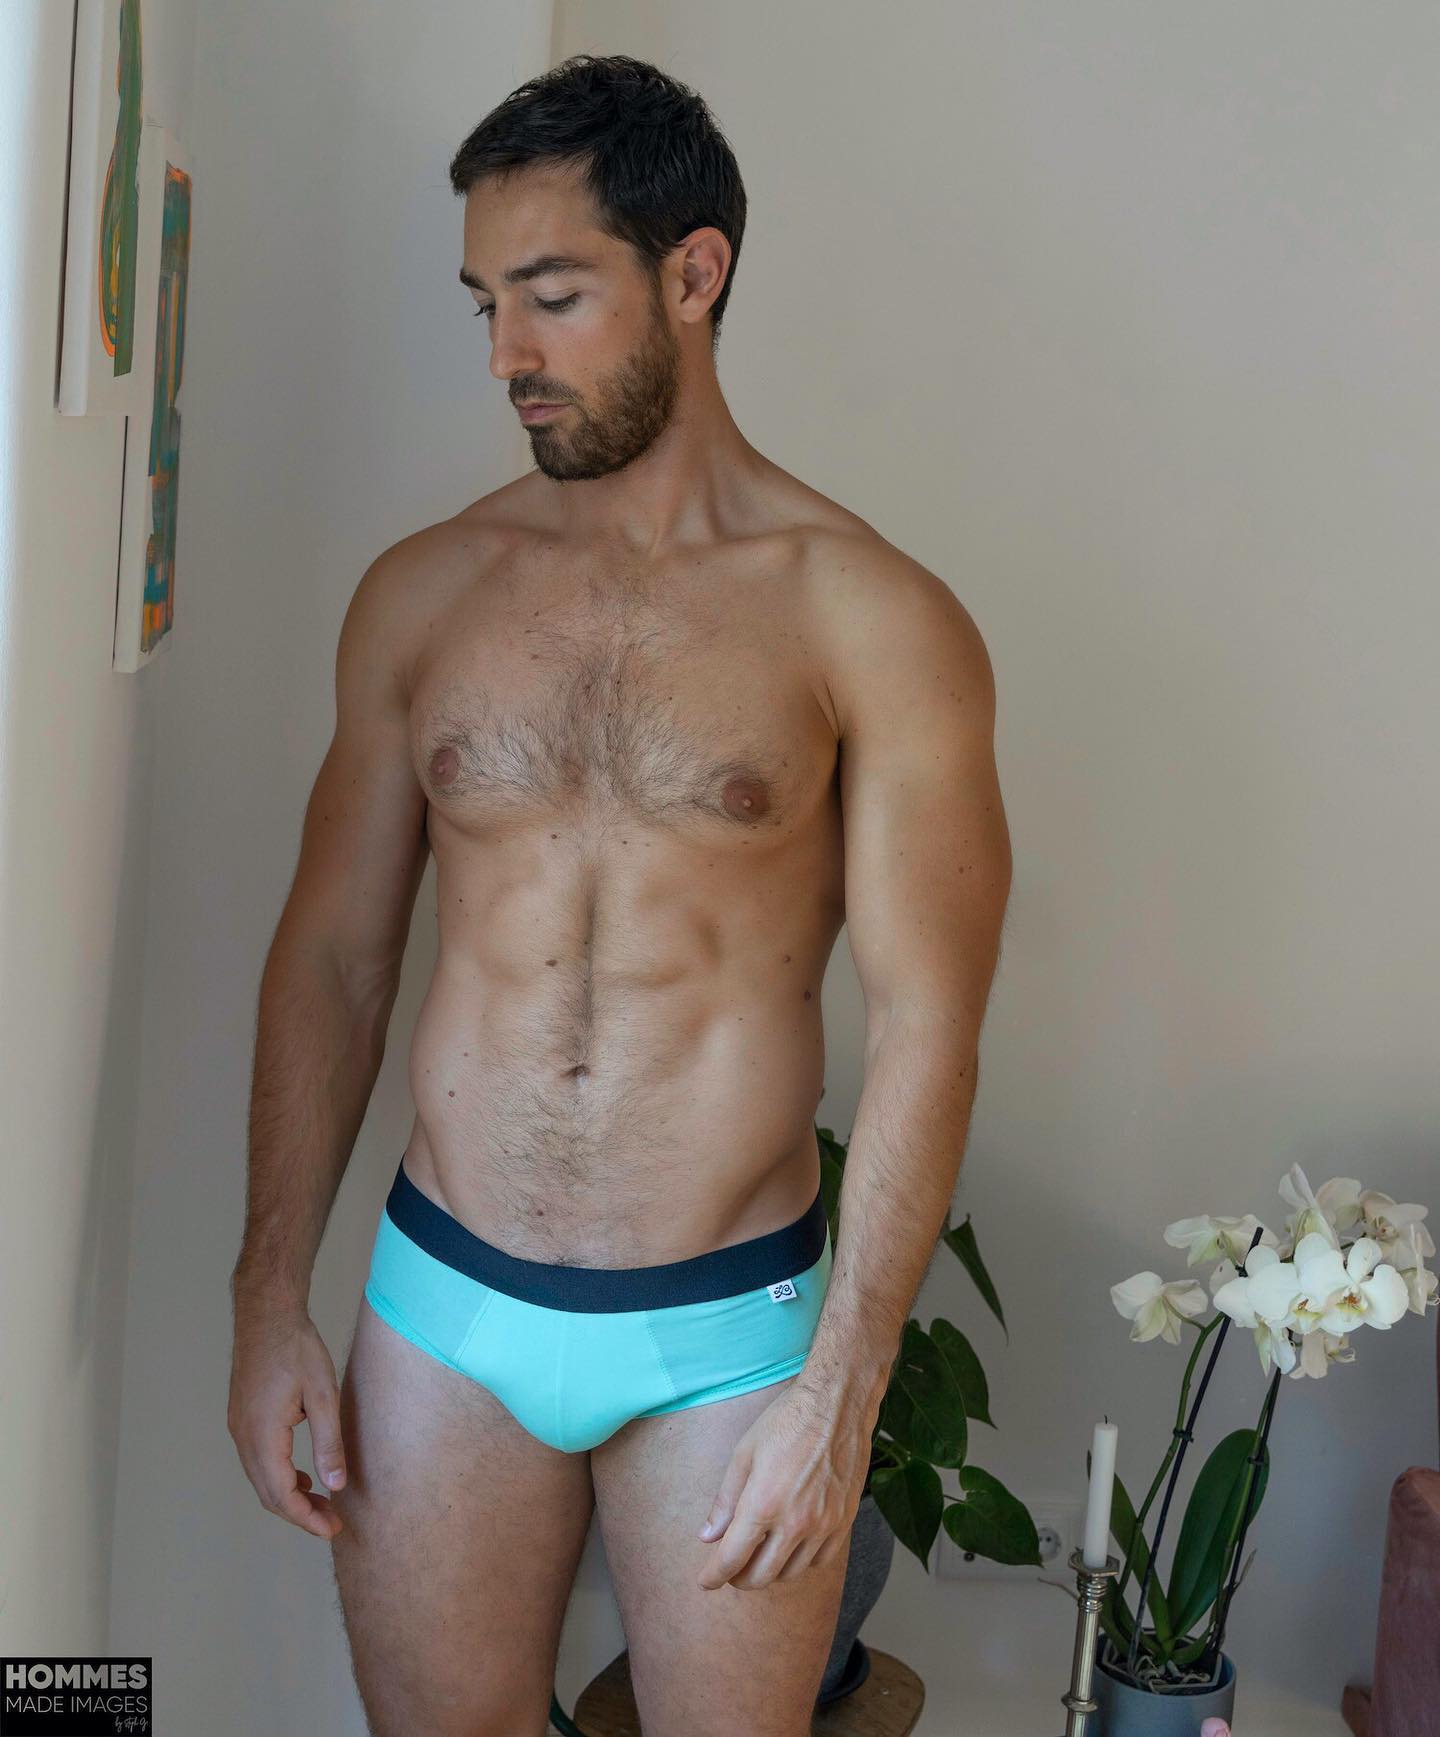 From the house of LeBeauTom here are the Greendr Briefs. The name comes from how the French pronounce Grindr! If you fancy comfort with a touch of humour, then this is for you:
___
https://menandunderwear.com/shop/underwear/lebeautom-greendr-briefs